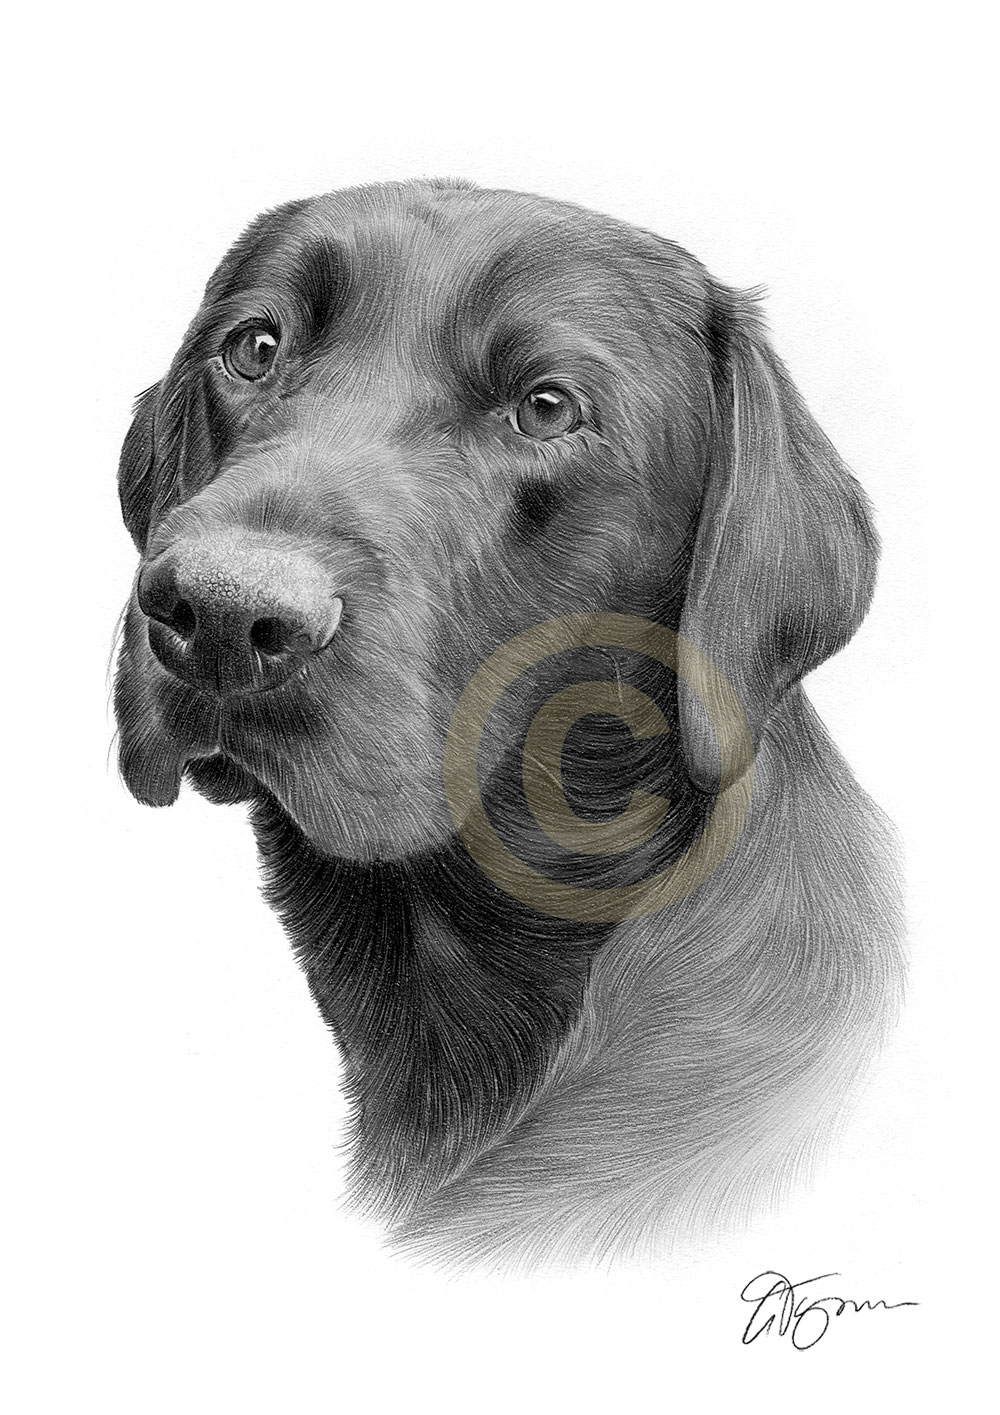 Pencil drawing commission of a retriever called Harley by artist Gary Tymon